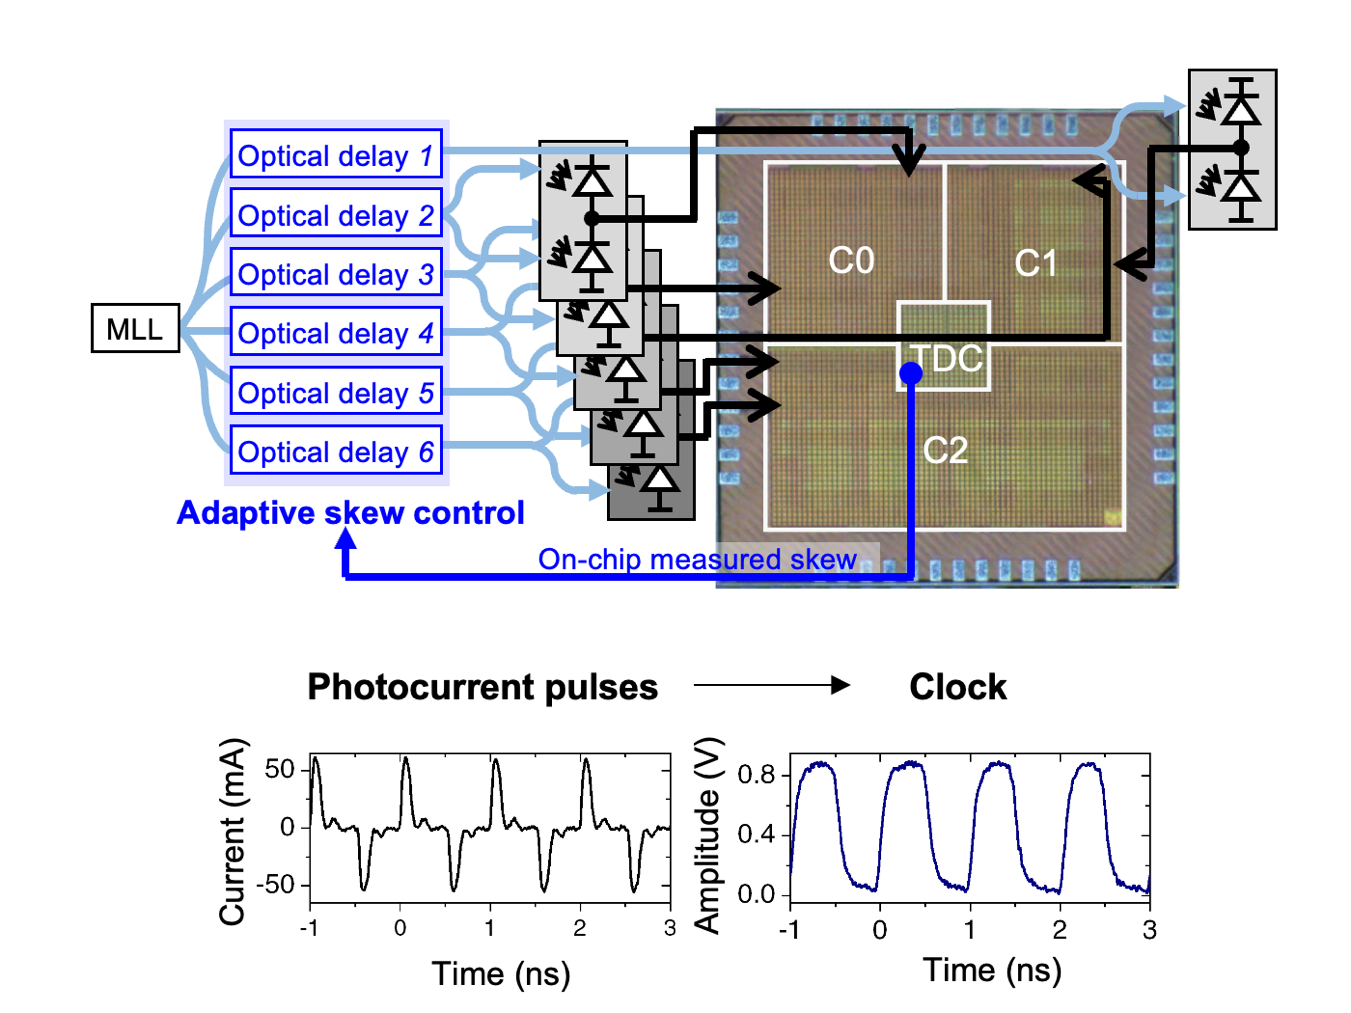 Figure 1. A Concept of injecting photocurrent pulses derived from light pulses into a semiconductor chip for clocking integrated circuits. Figure 1B The graphs show  photocurrent pulsesintegrated by on-chip capacitance to square-wave clock signals in the chip.